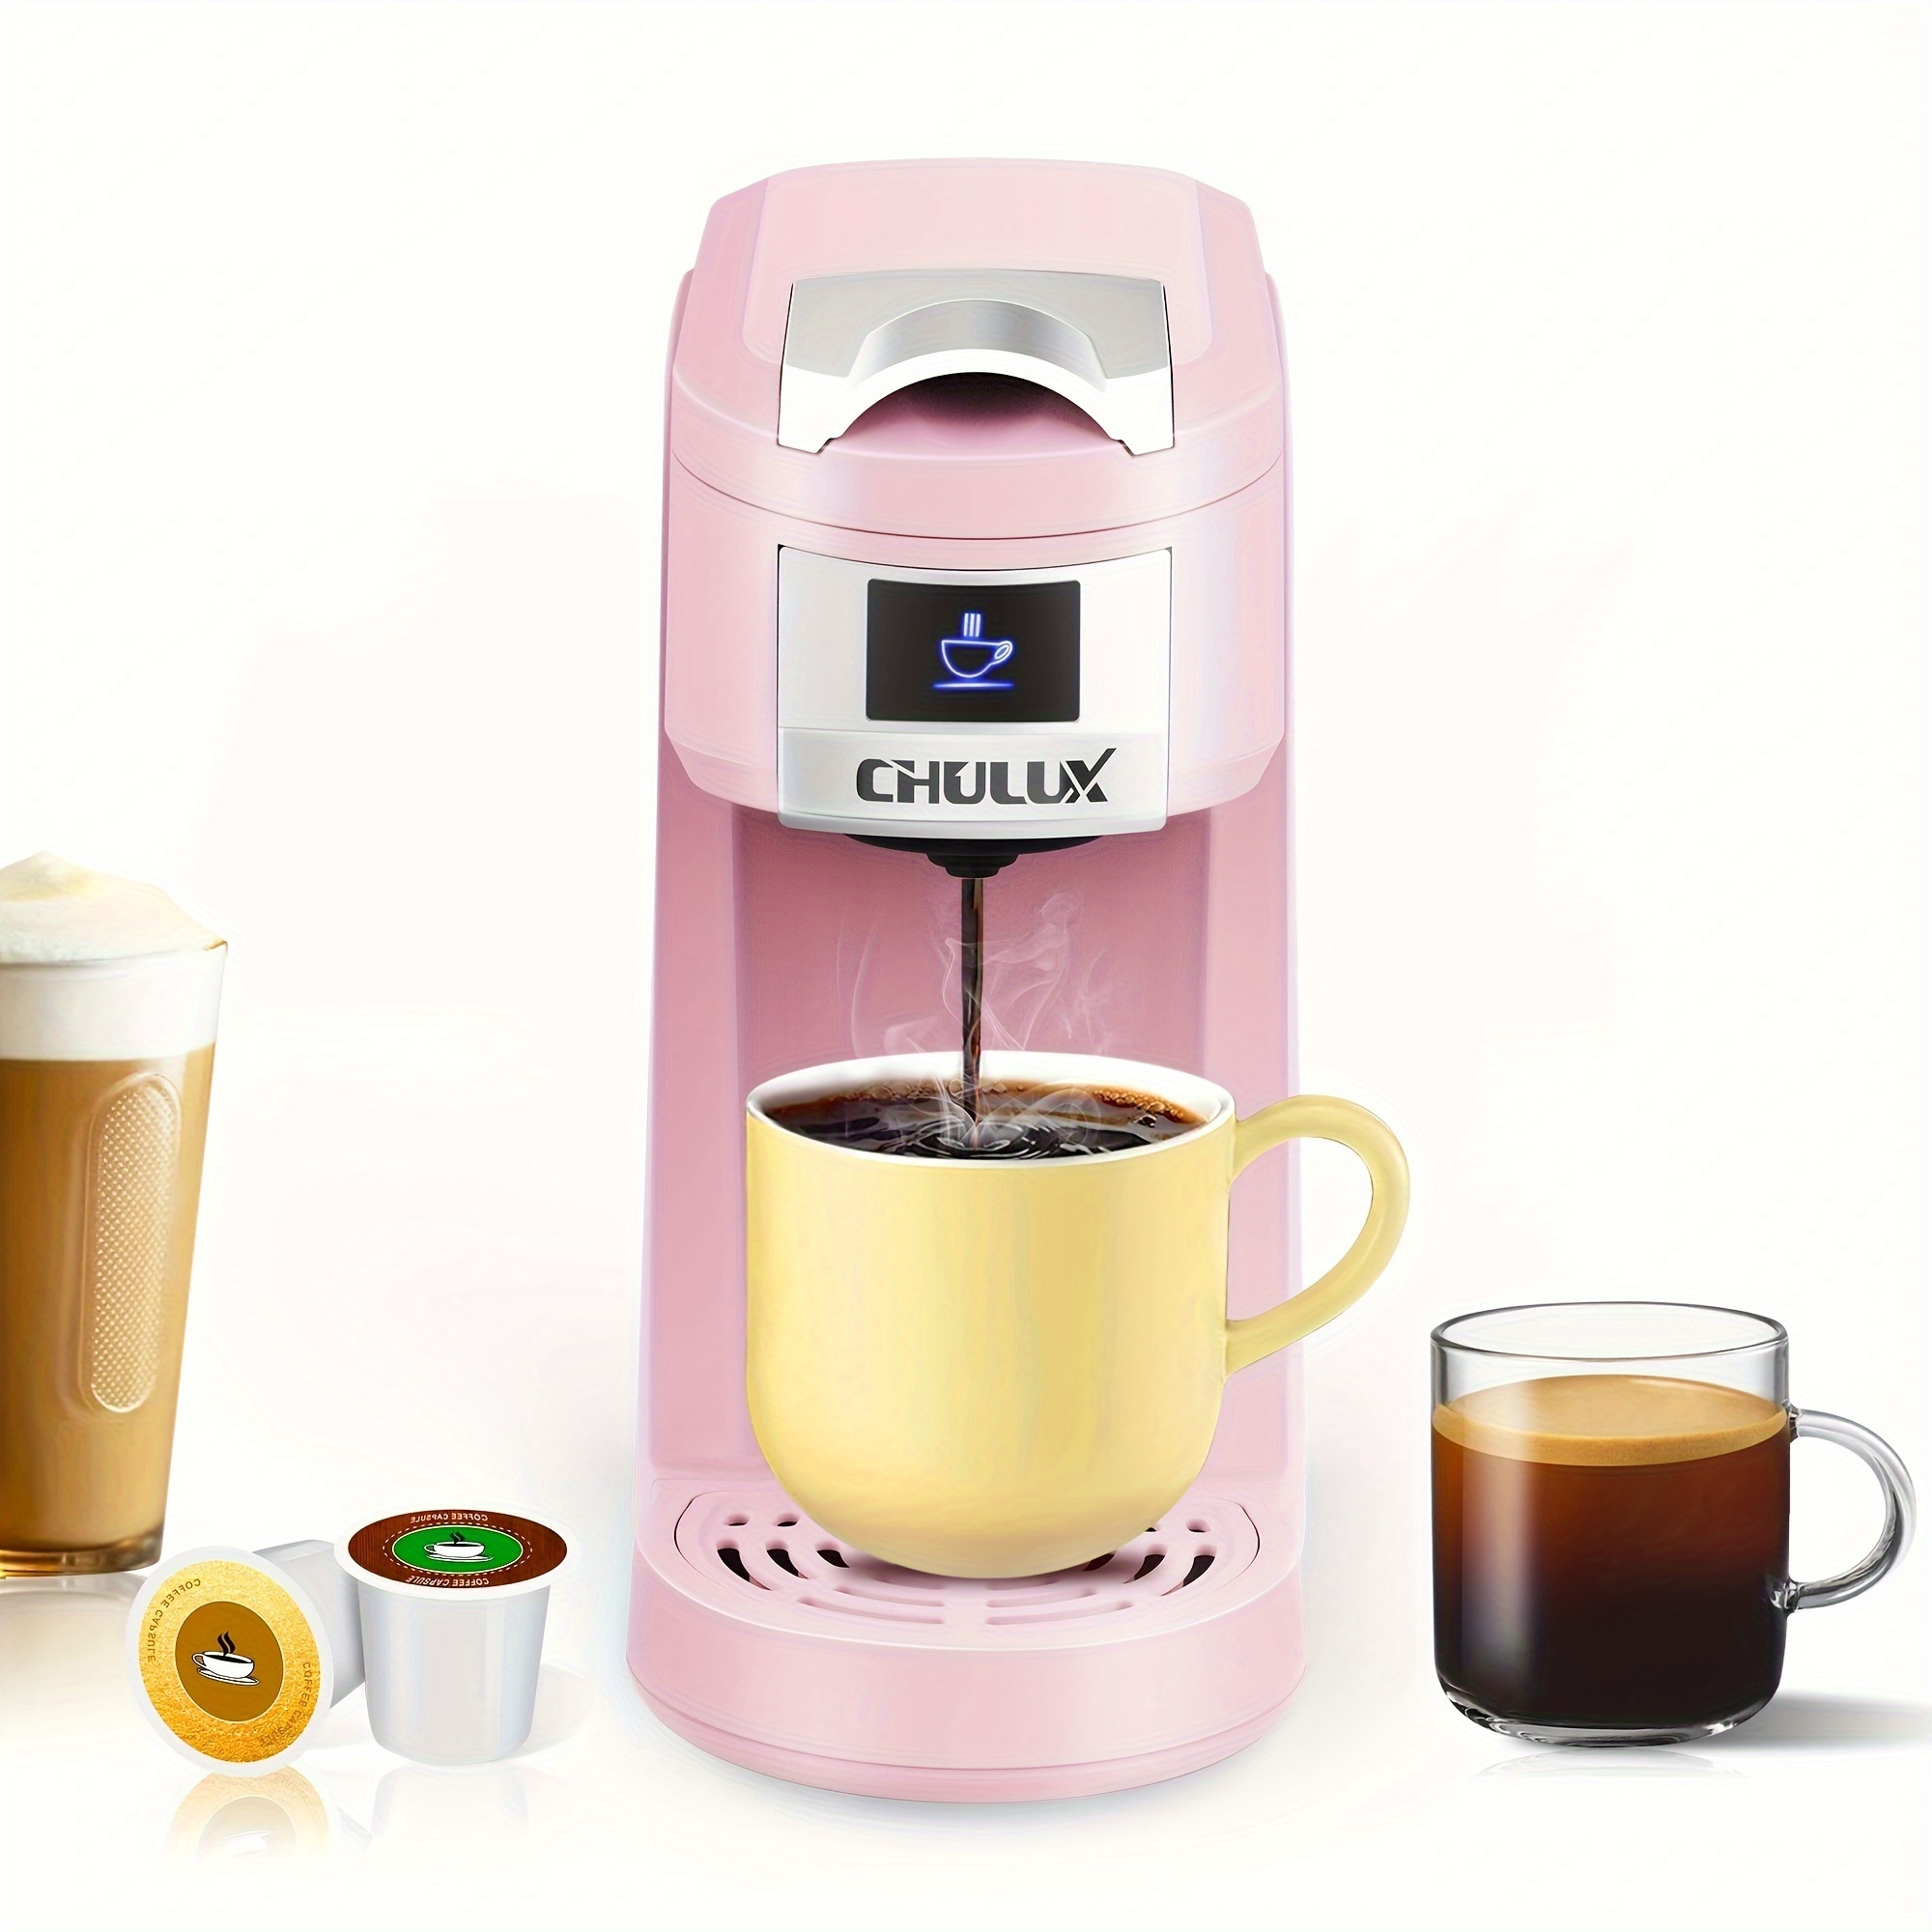 1pc coffee brewer chulux pink single serve coffee maker 3 in 1 machine for k cups pods and ground coffee fast brewing in minutes auto shut off includes coffee tool